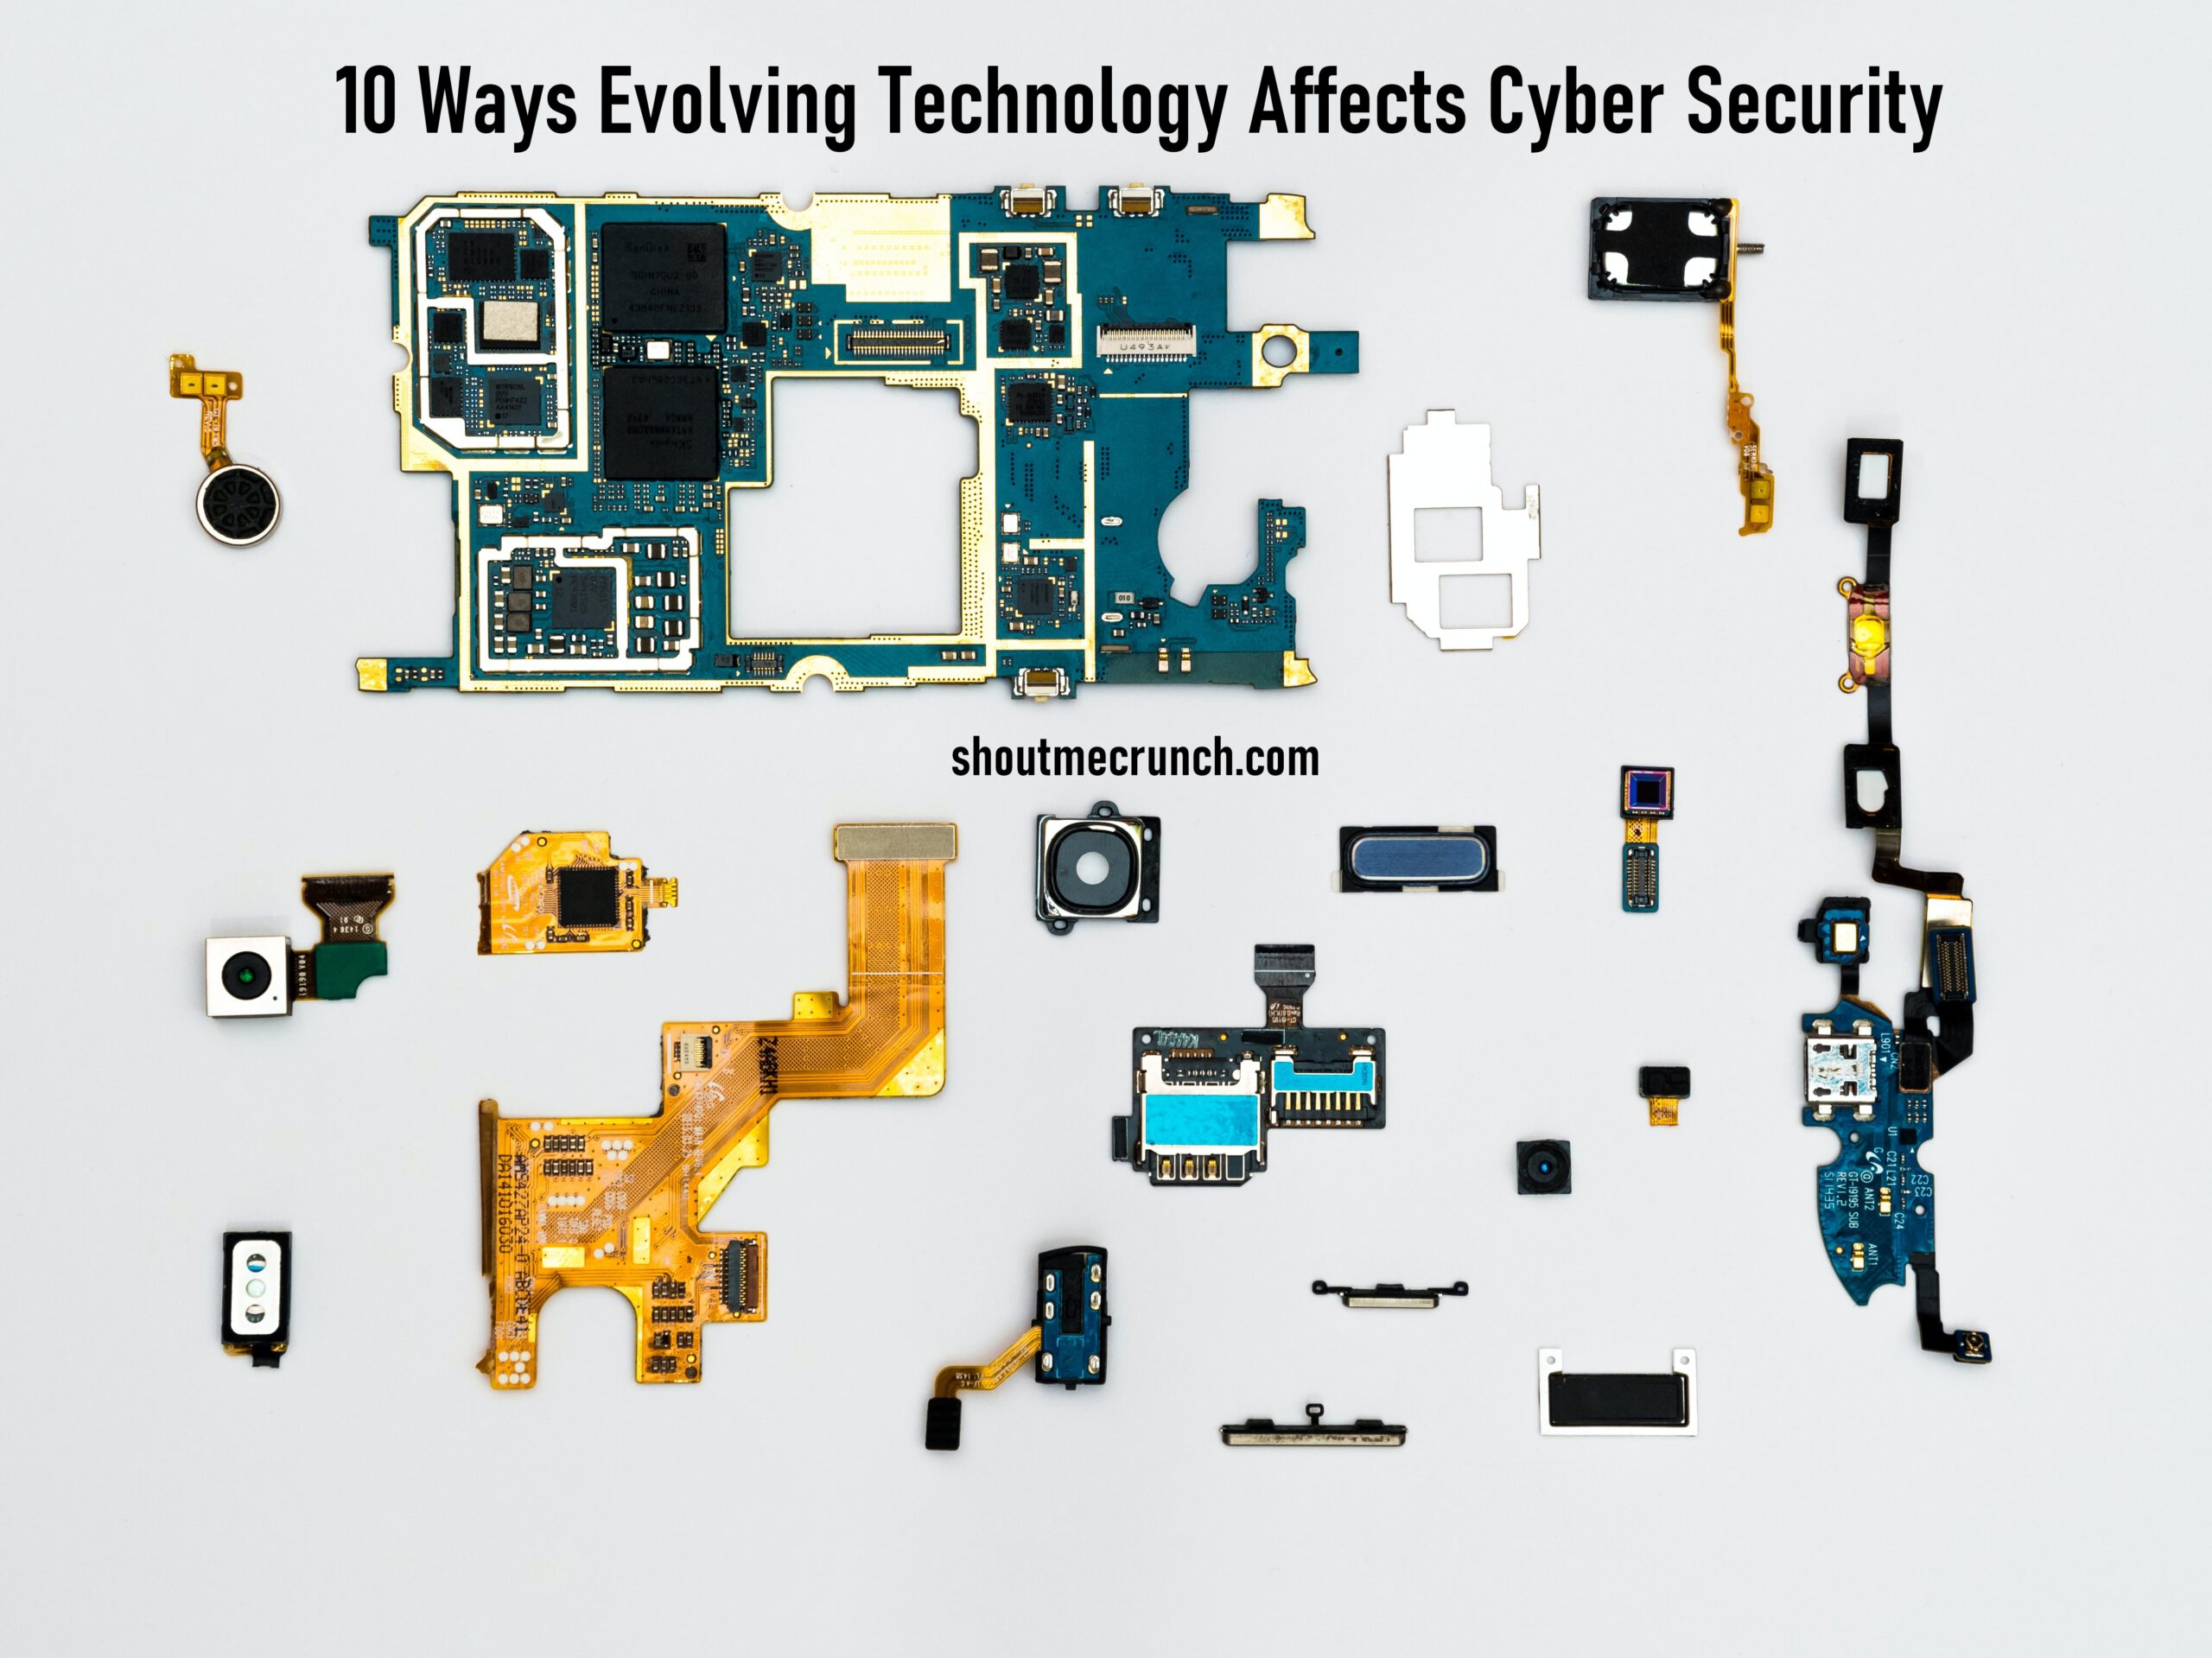 10 Ways Evolving Technology Affects Cyber Security